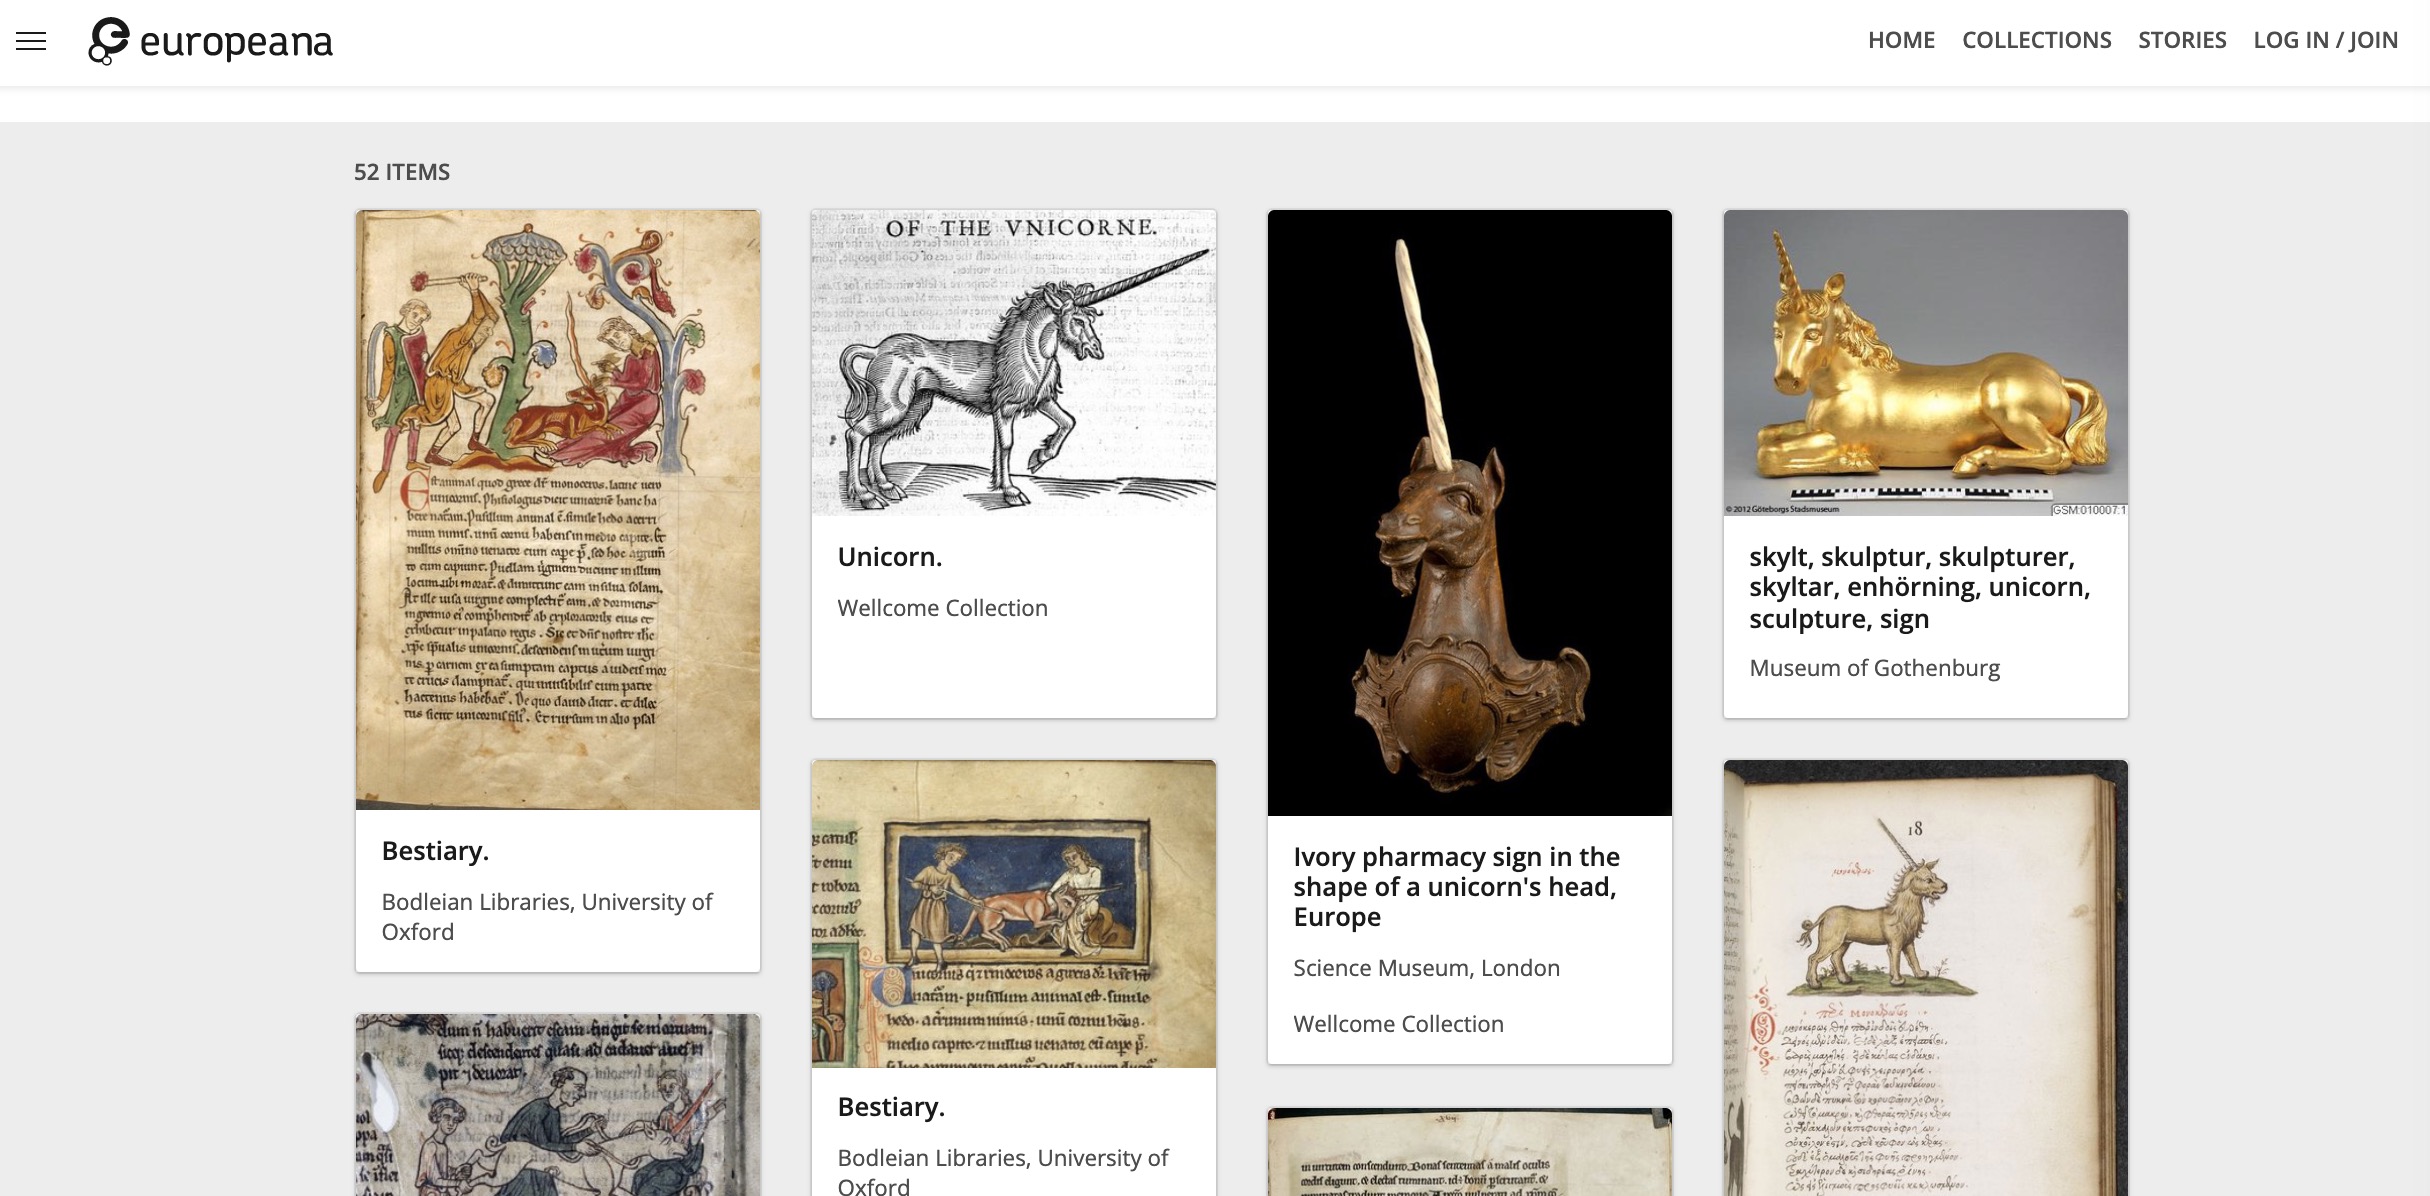 a screen full of unicorn images available in this collection